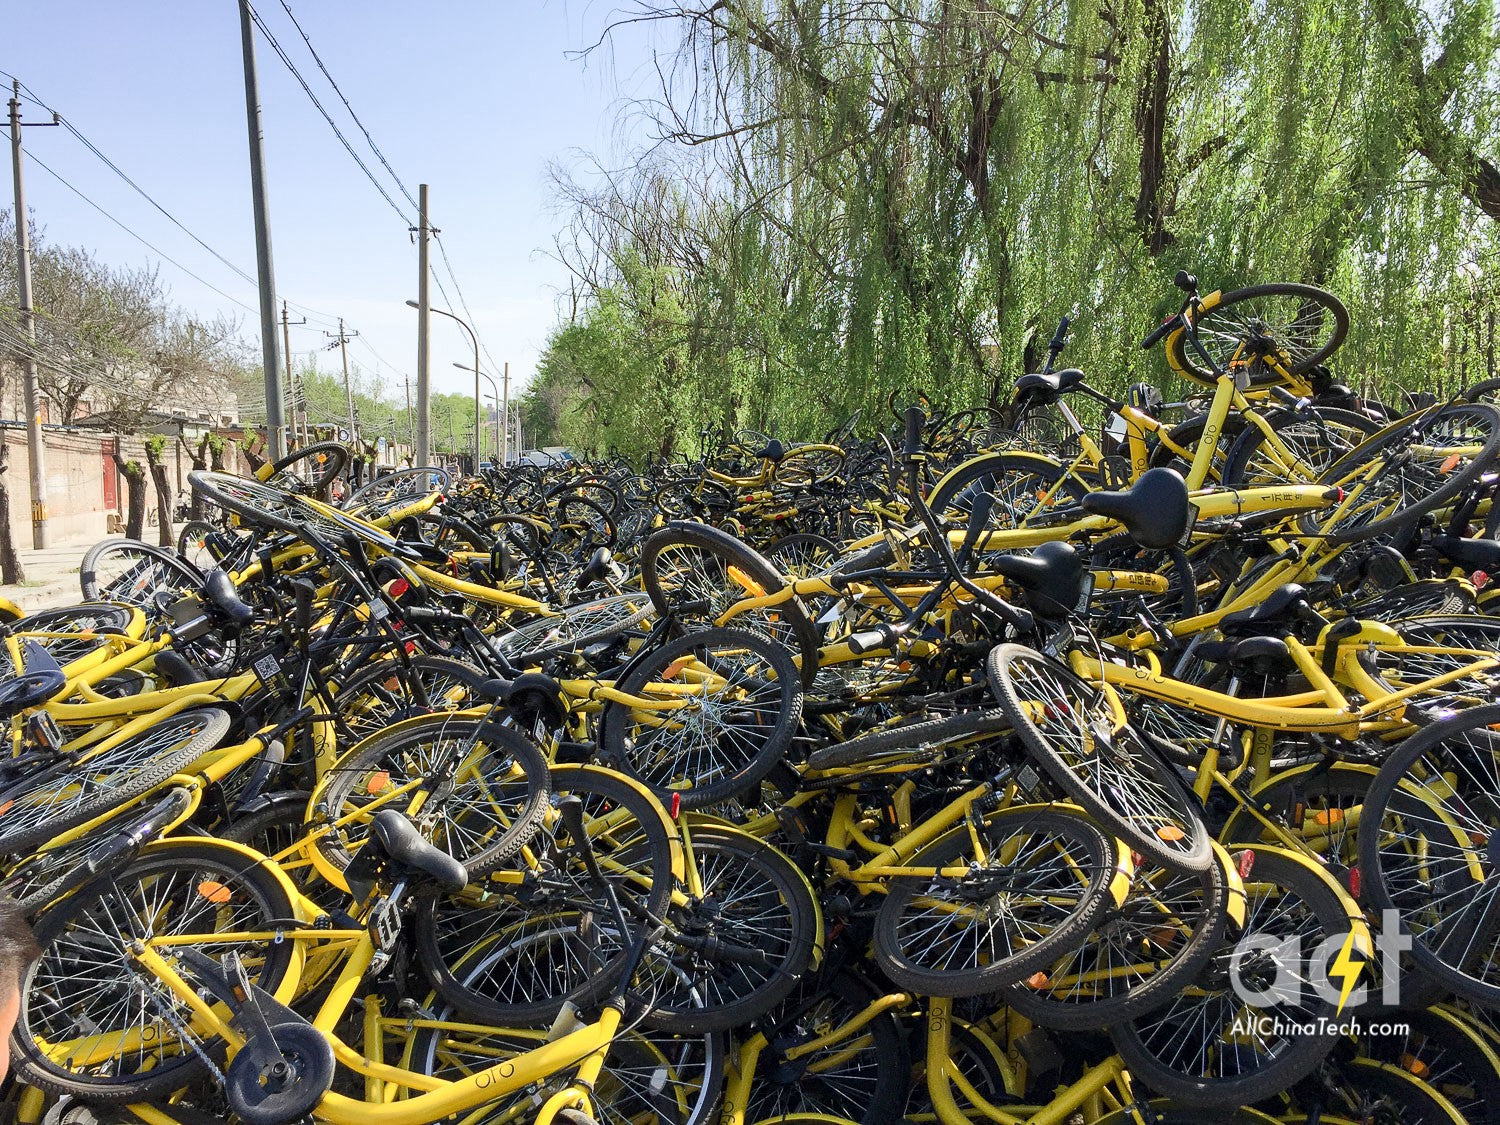 bicycles from sharing company vandalised